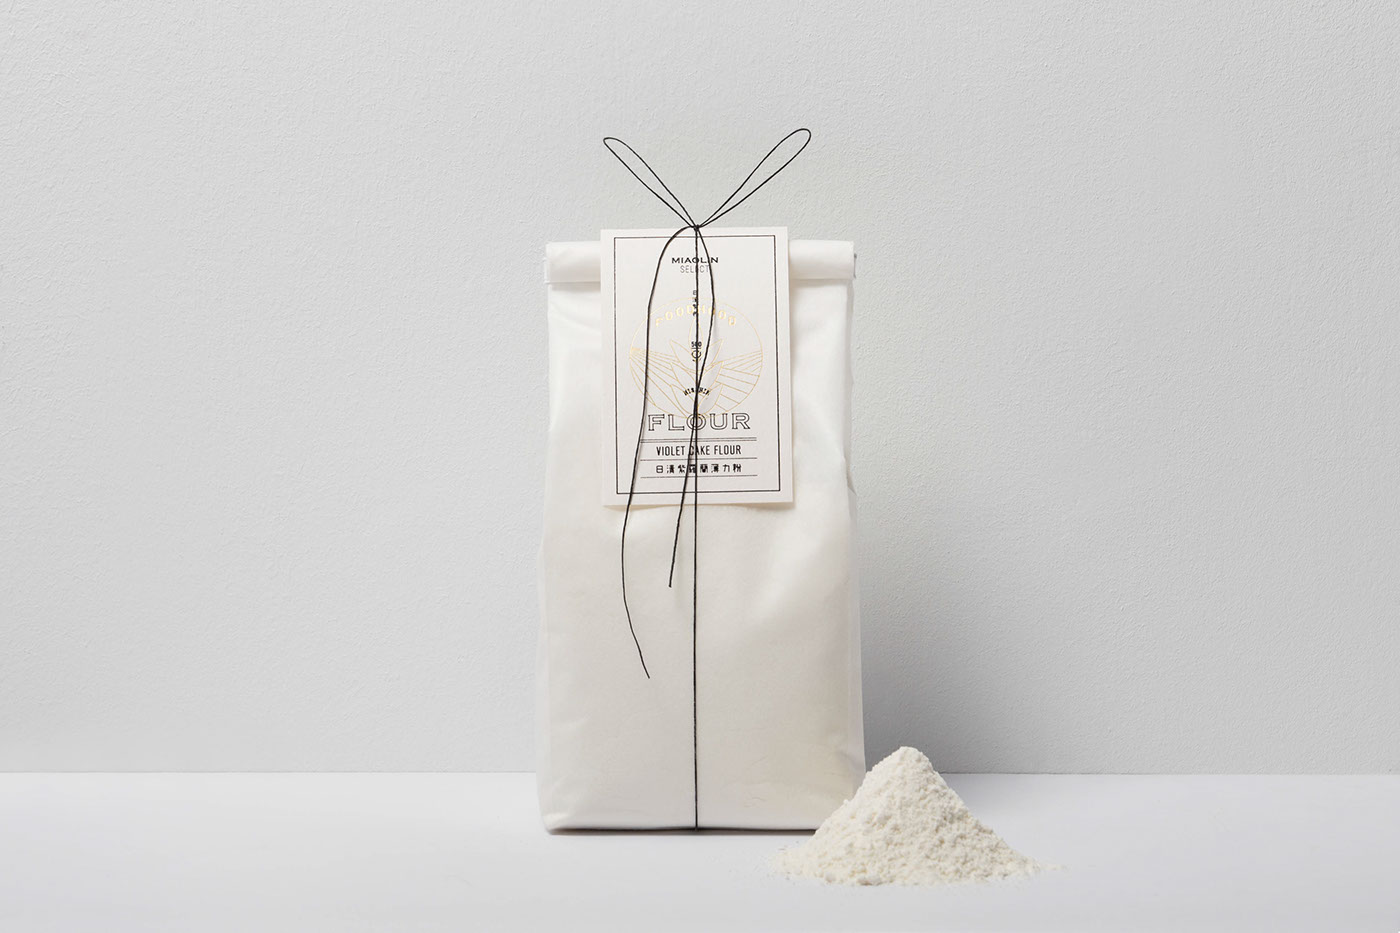 oodhoodtpe foodhood flour miaolinselect 日清製粉 Packaging packagingdesign houth goldstamping graphicdesign